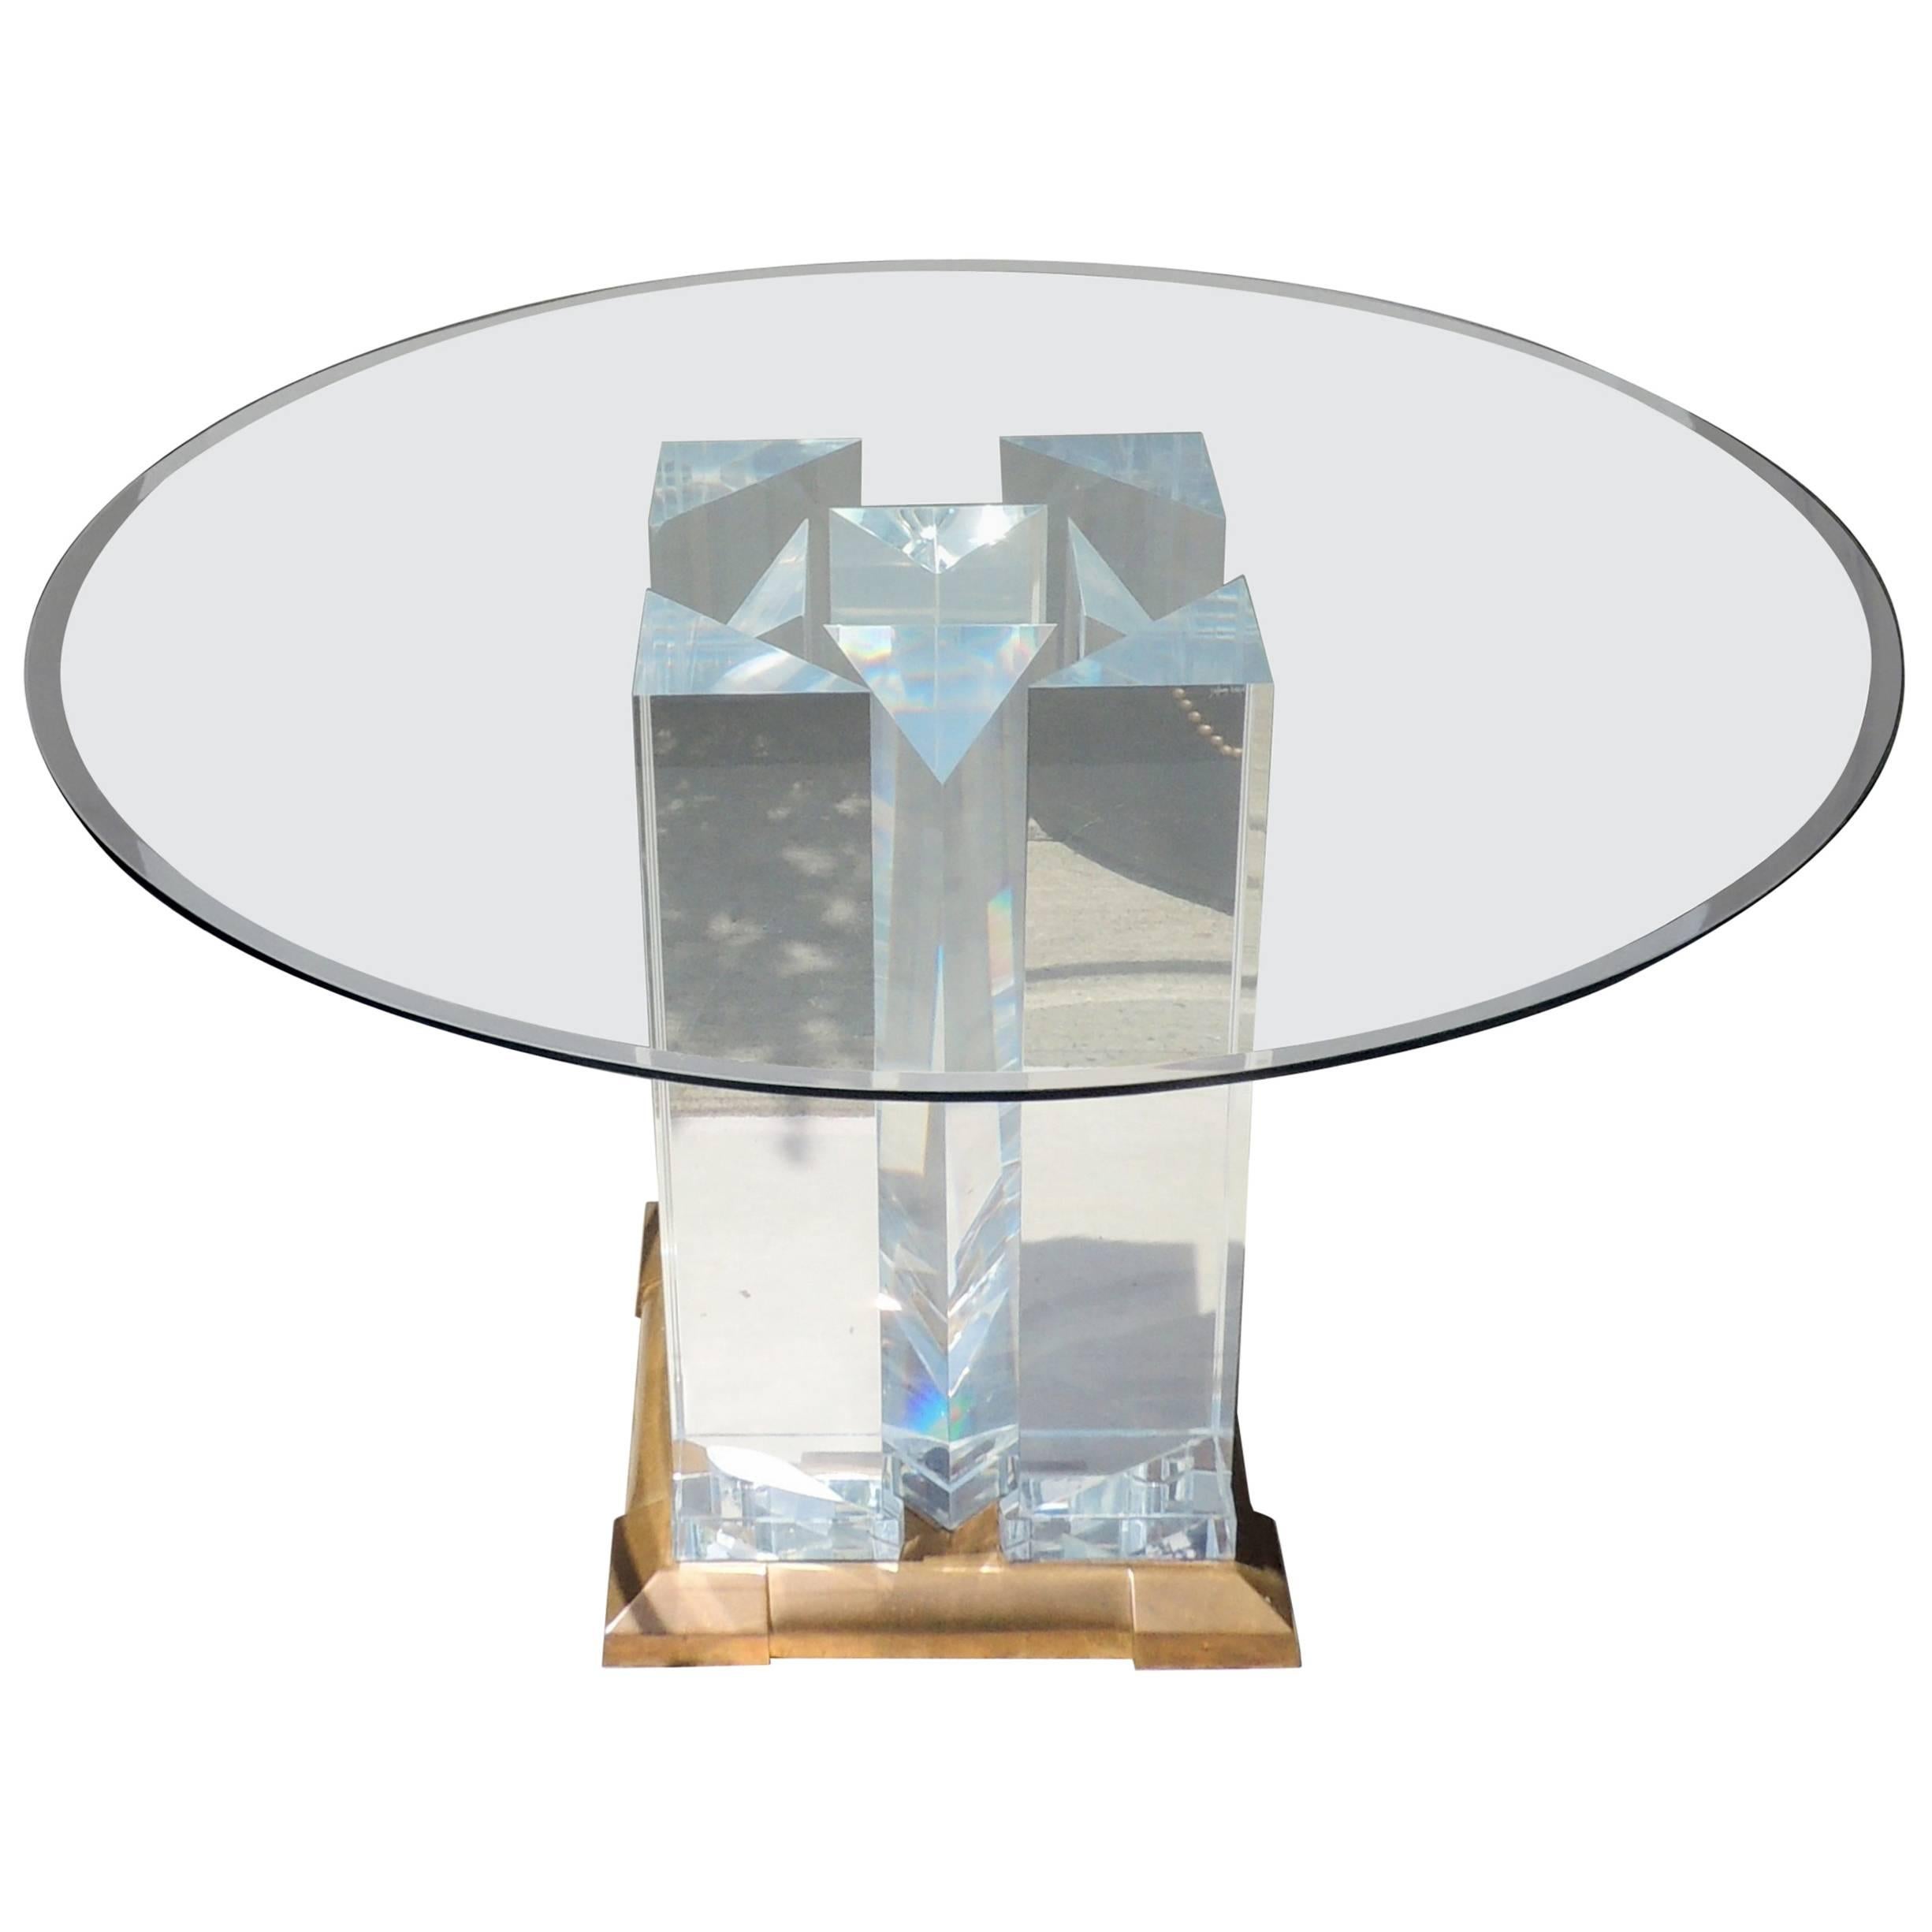 Rare Signed Jeffrey Bigelow Towers Lucite Modern Center Dining Table Bronze Base